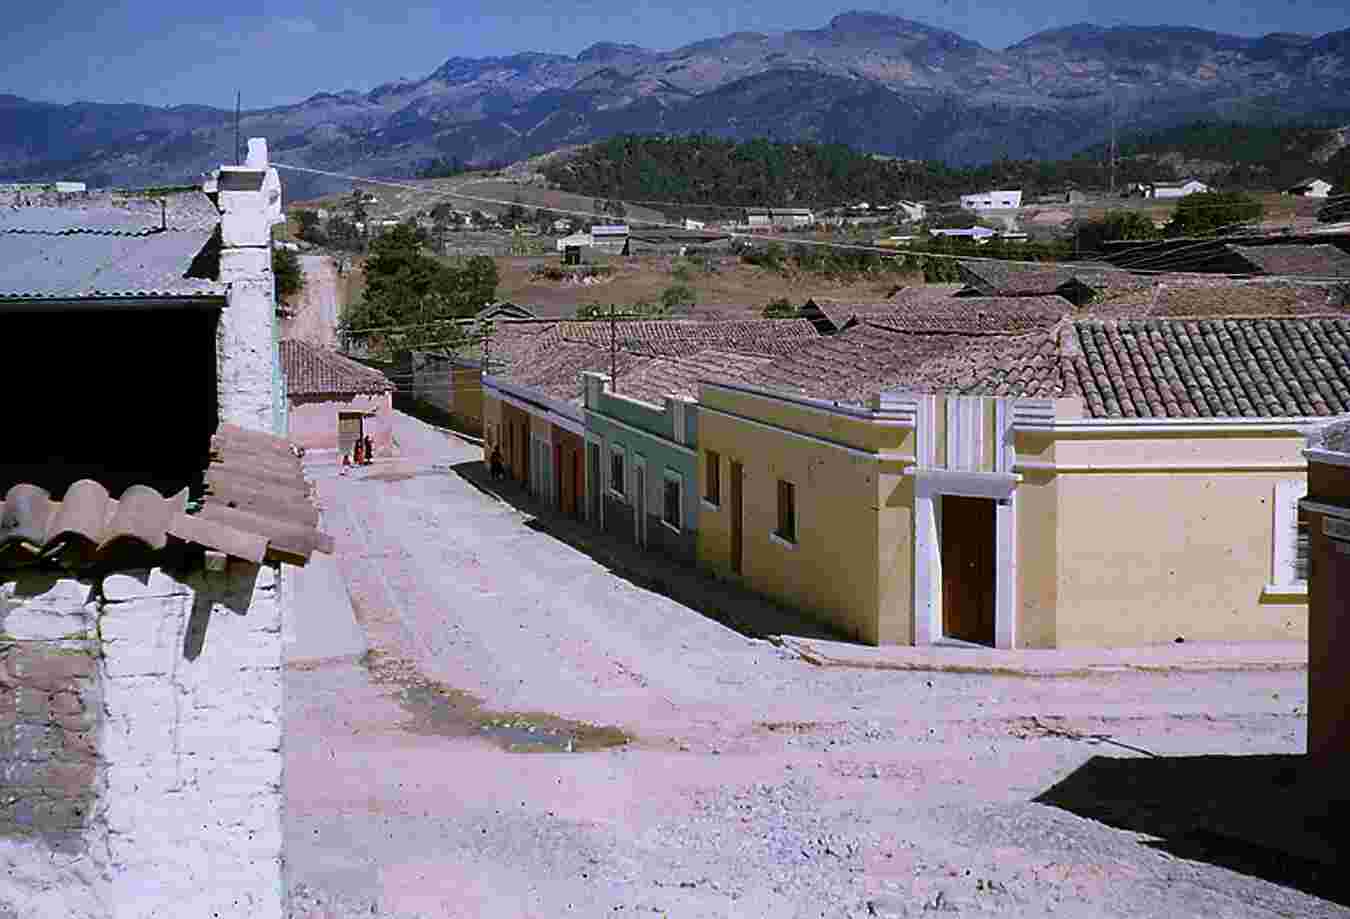 Figure 1.9. Huehuetenango. The yellow house on the corner (with a door and two windows) was my home and project headquarters, shared with Francisco Santizo Andrés. In the background, the Cuchumatán Mountains. Photo by the author.